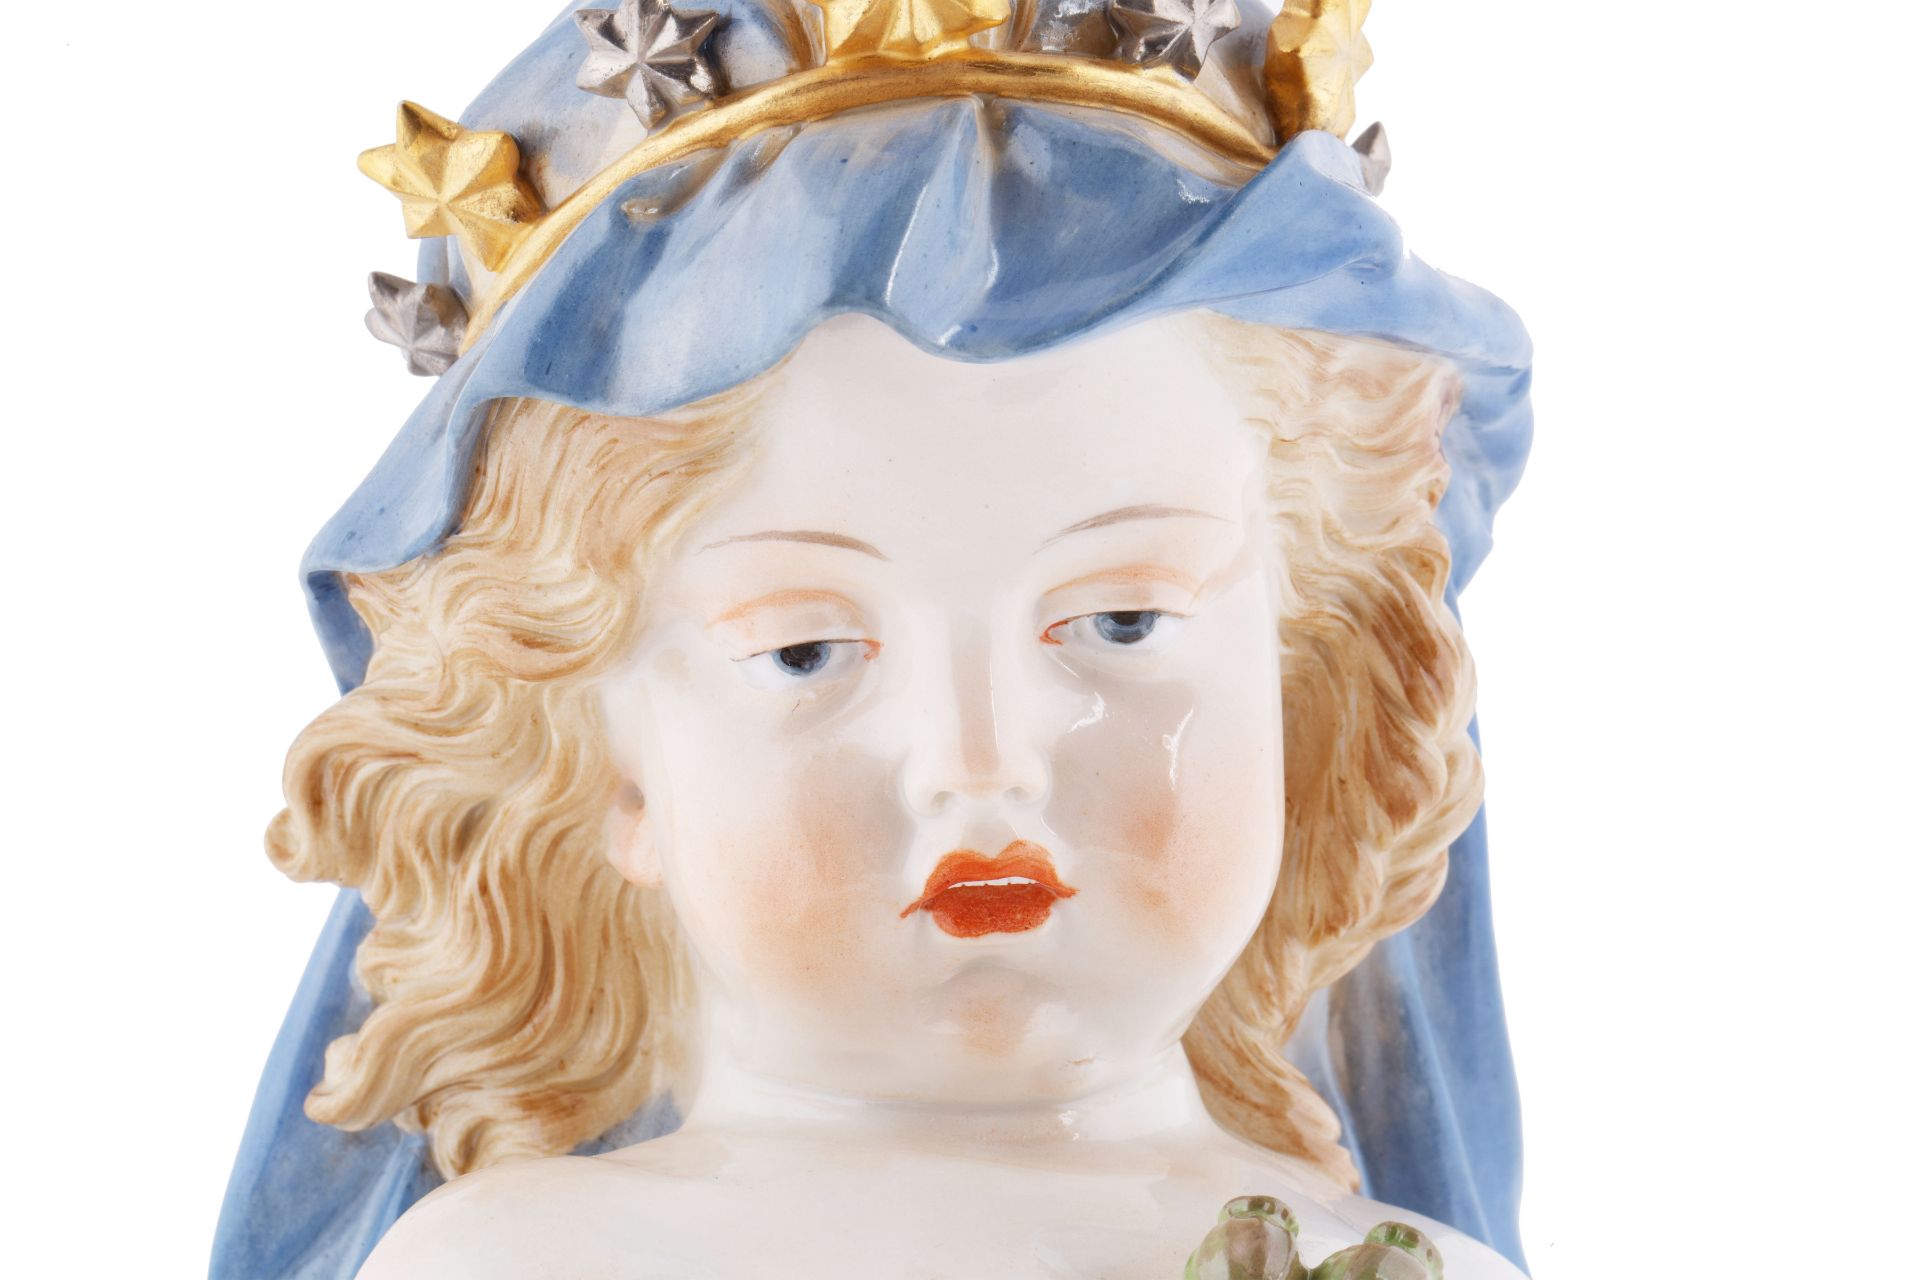 LATE 19TH CENTURY MEISSEN PORCELAIN FIGURINE EMBLEMATIC OF "NIGHT" - Image 3 of 6